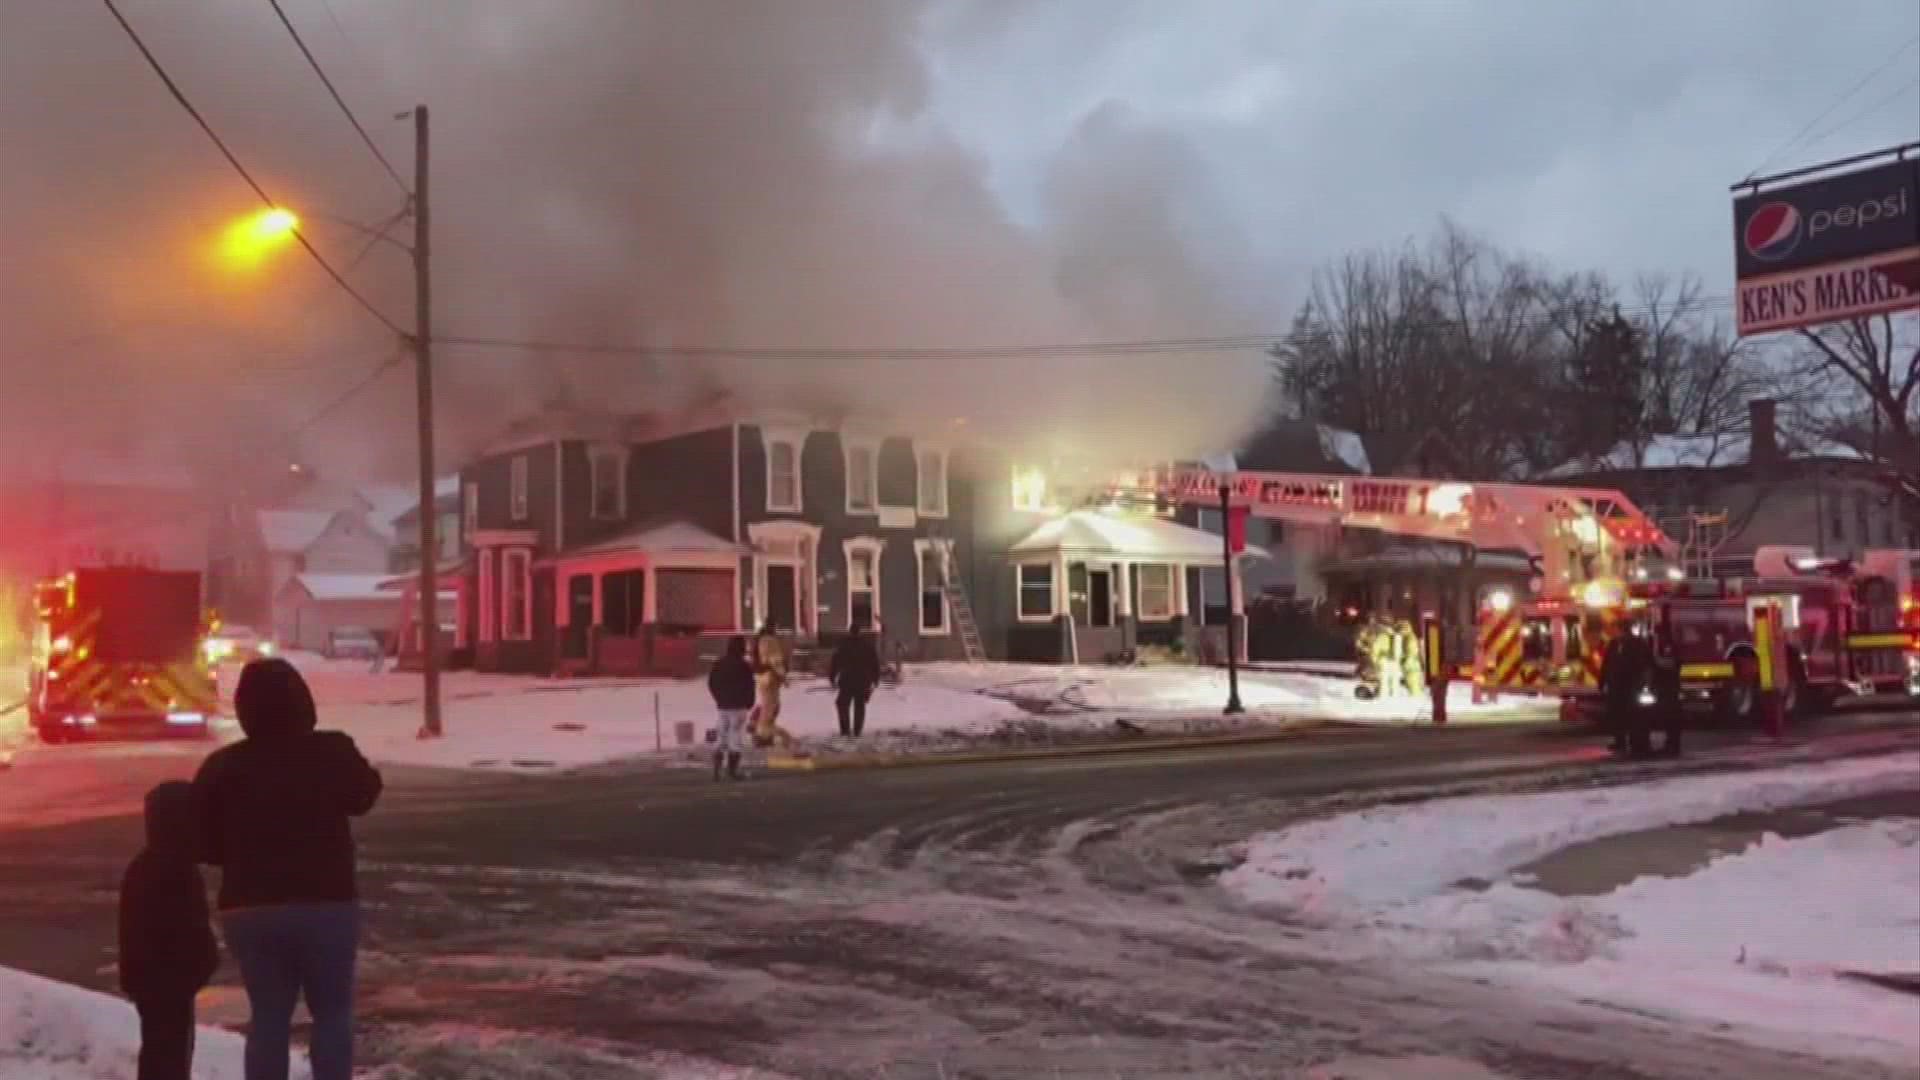 An assistant chief with the Newark Fire Department said the fire happened at 16 West Oak Street around 5:30 p.m.